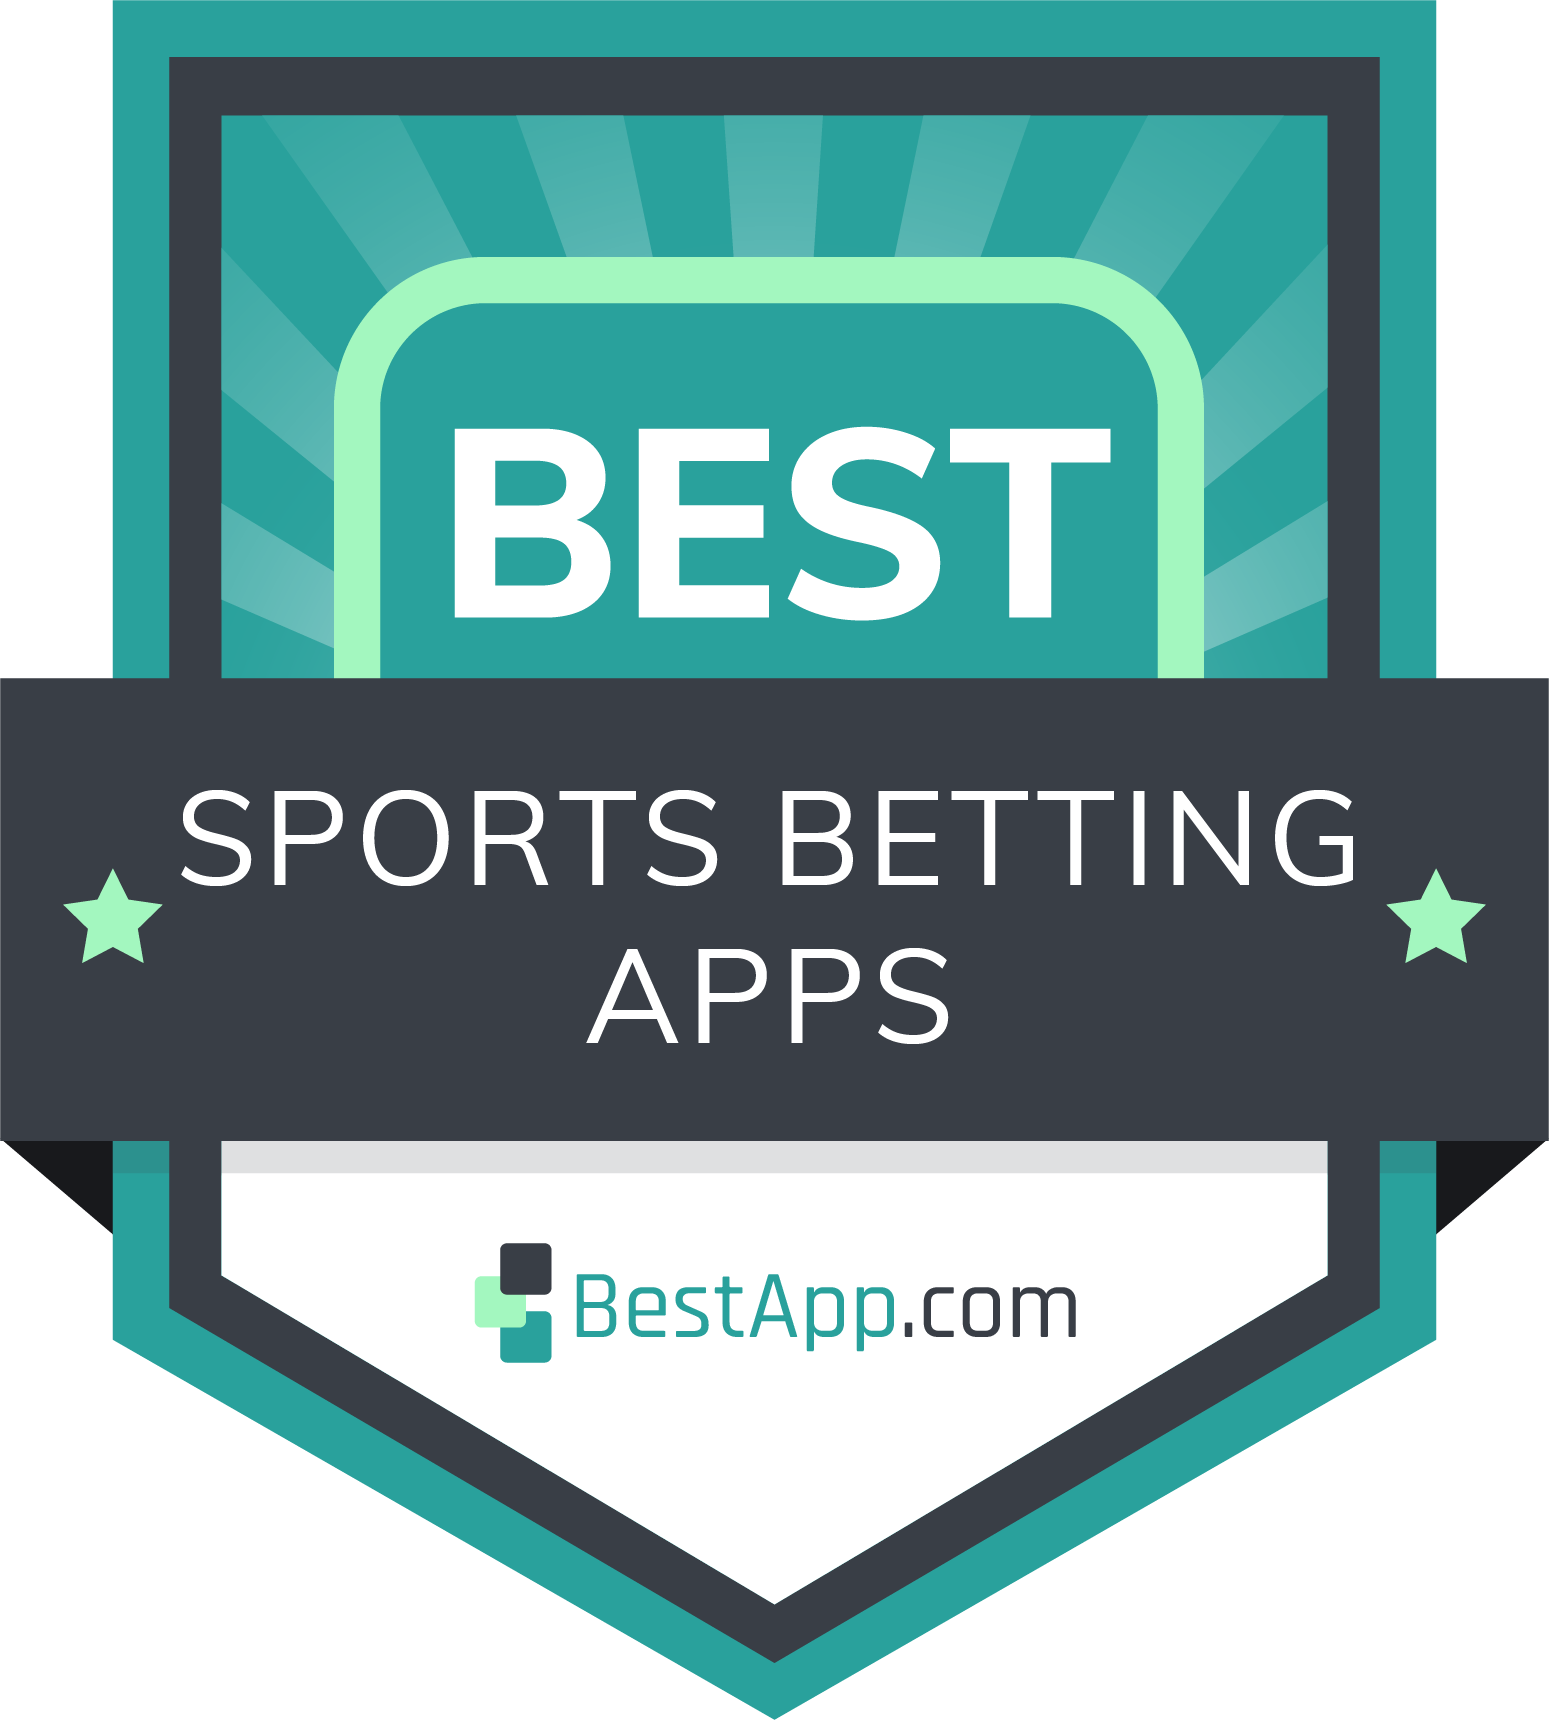 5 Simple Steps To An Effective T20 Exchange Betting App Strategy